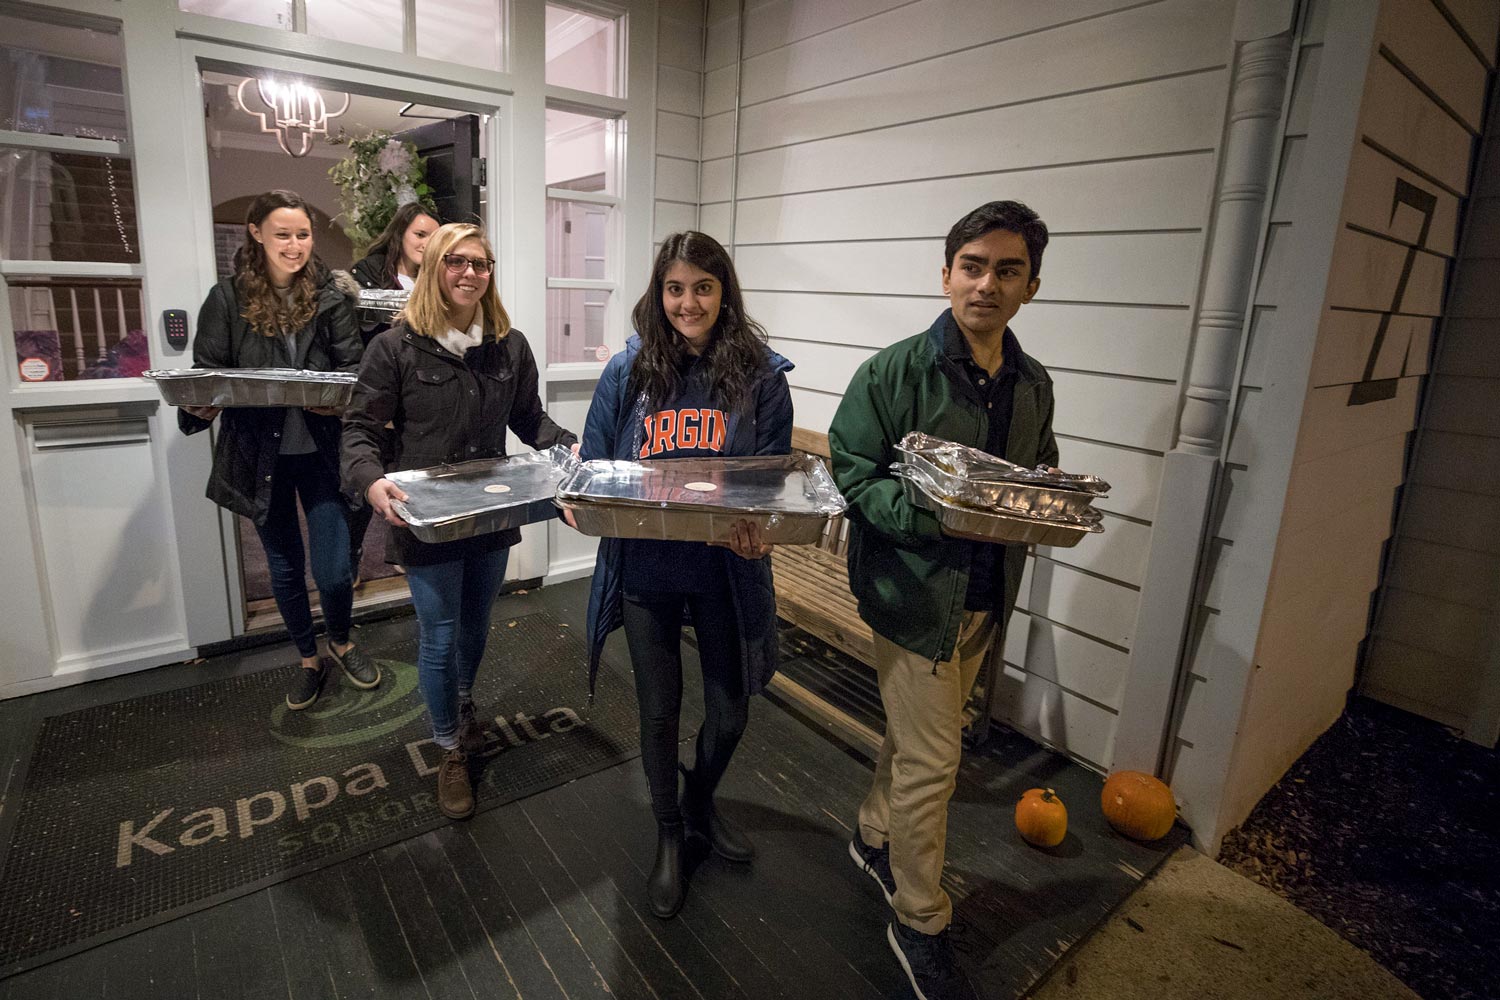 Students Annie Weinberg, Kayla Spigelman, Kristin Blake, Neha Chopra and Anup Nair carry aluminum foil pans out of a house